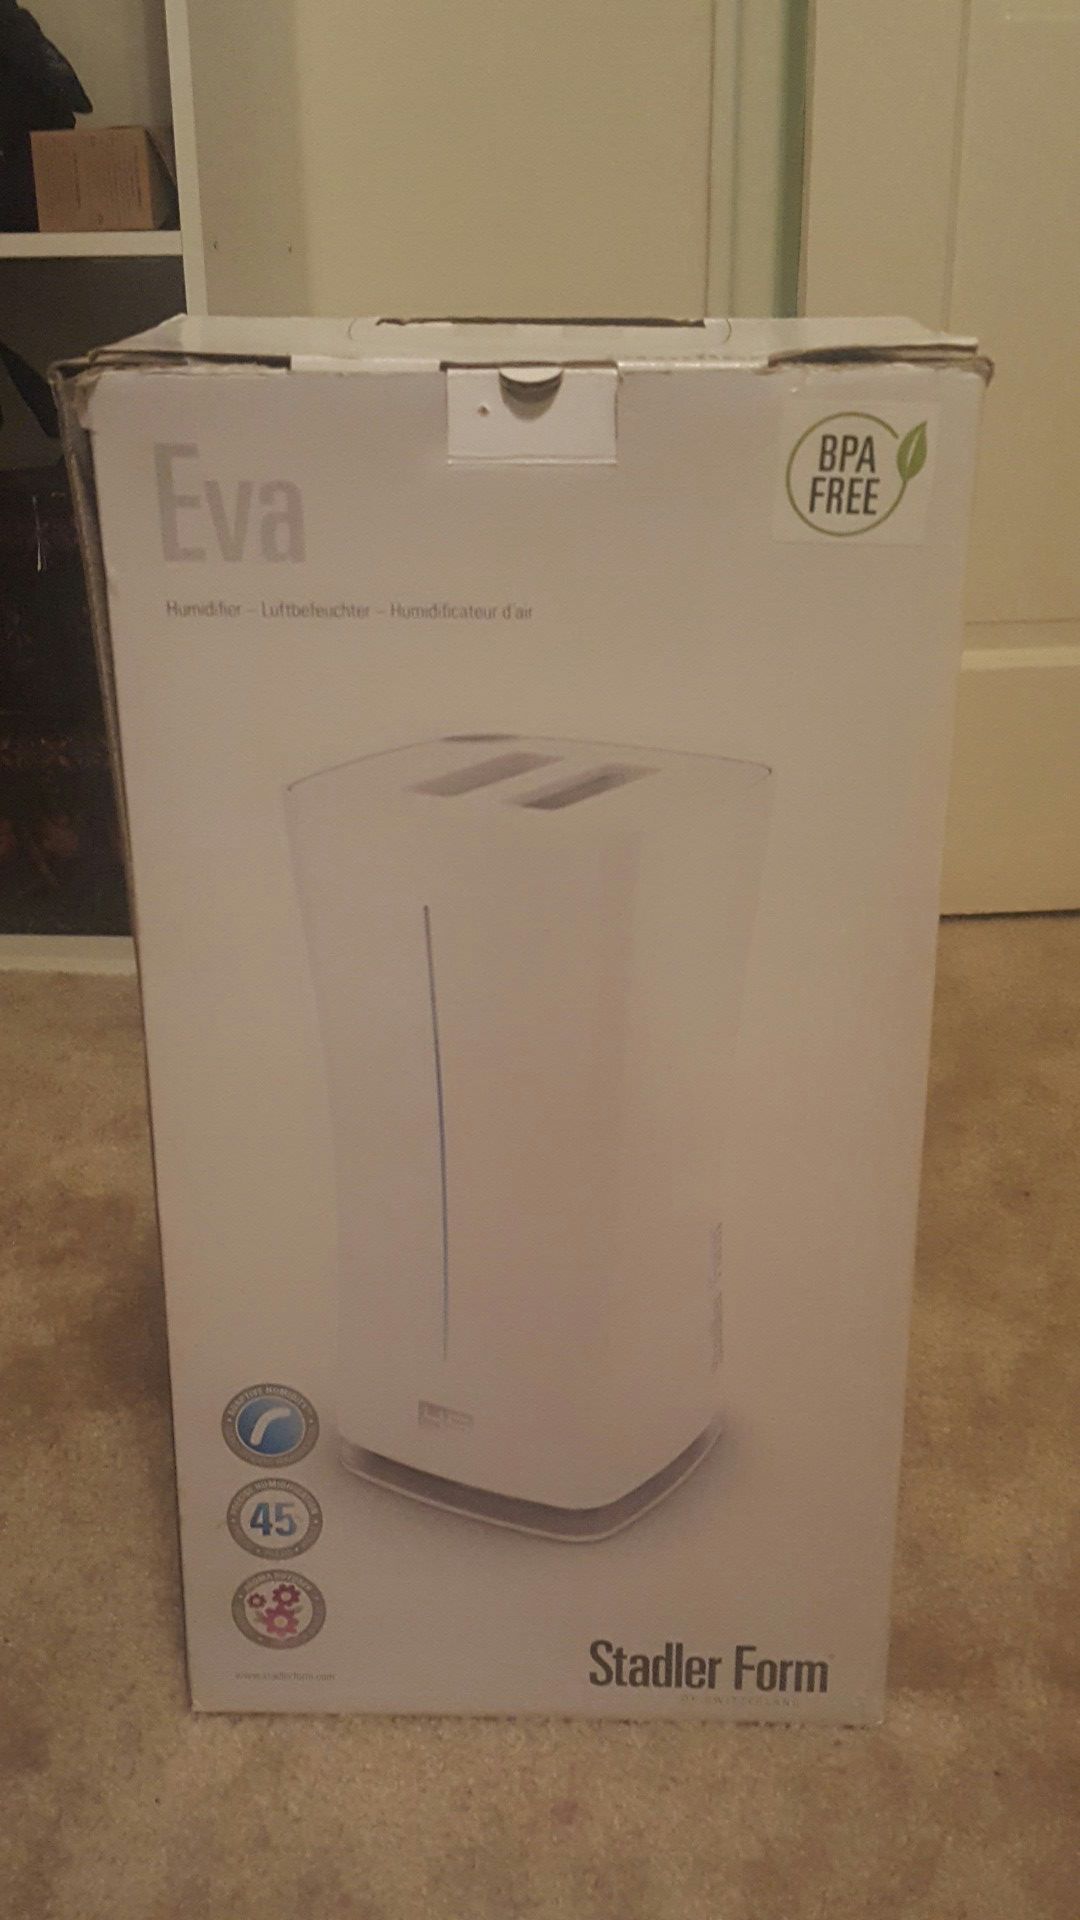 Humidifier - never used